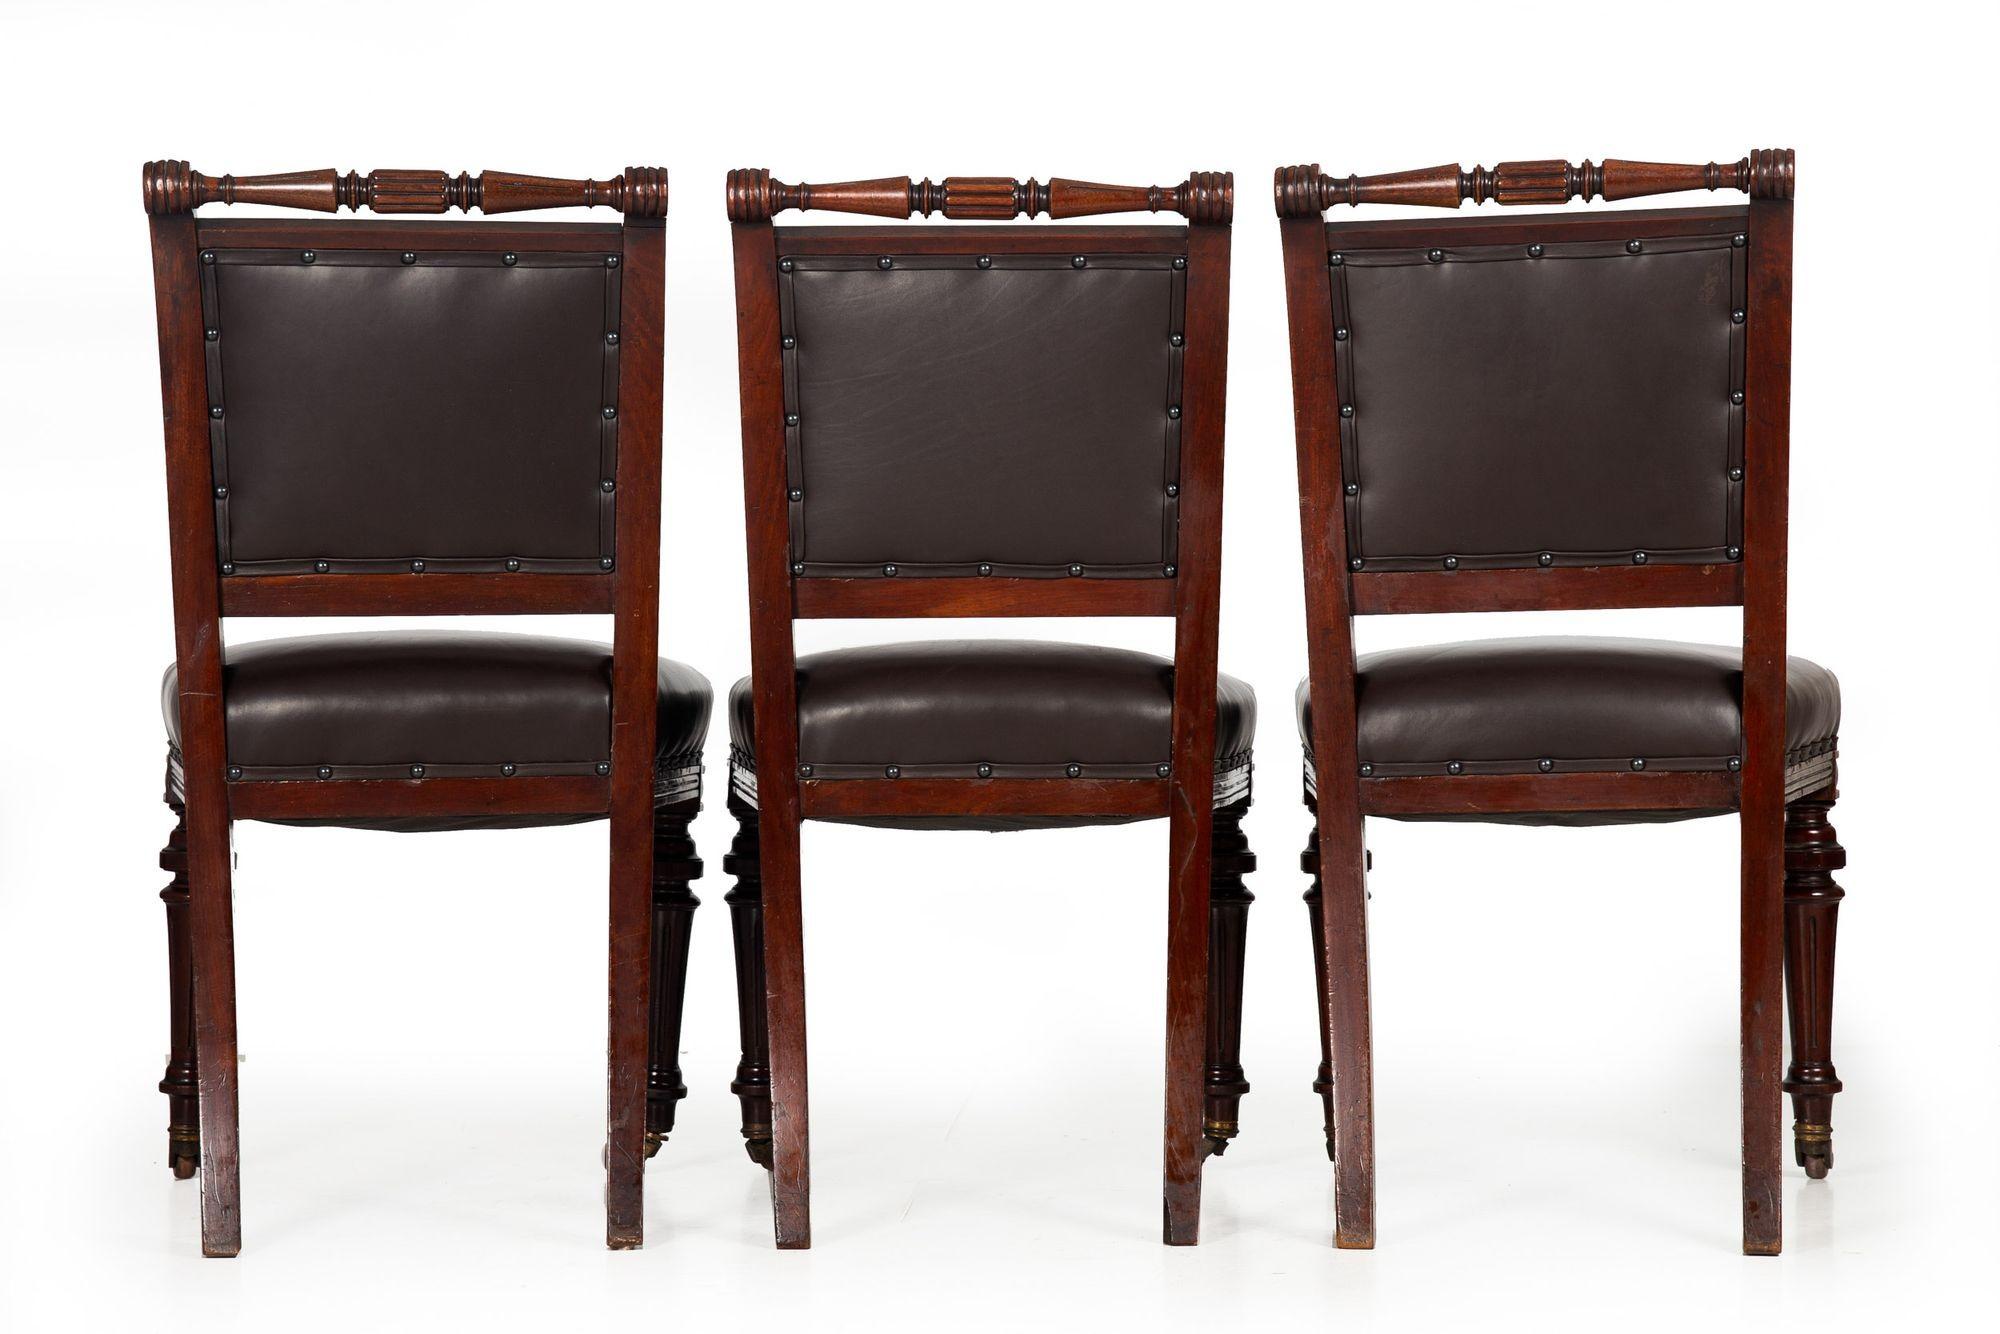 Set of 6 English Antique Mahogany and Leather Dining Chairs, 19th Century In Good Condition For Sale In Shippensburg, PA